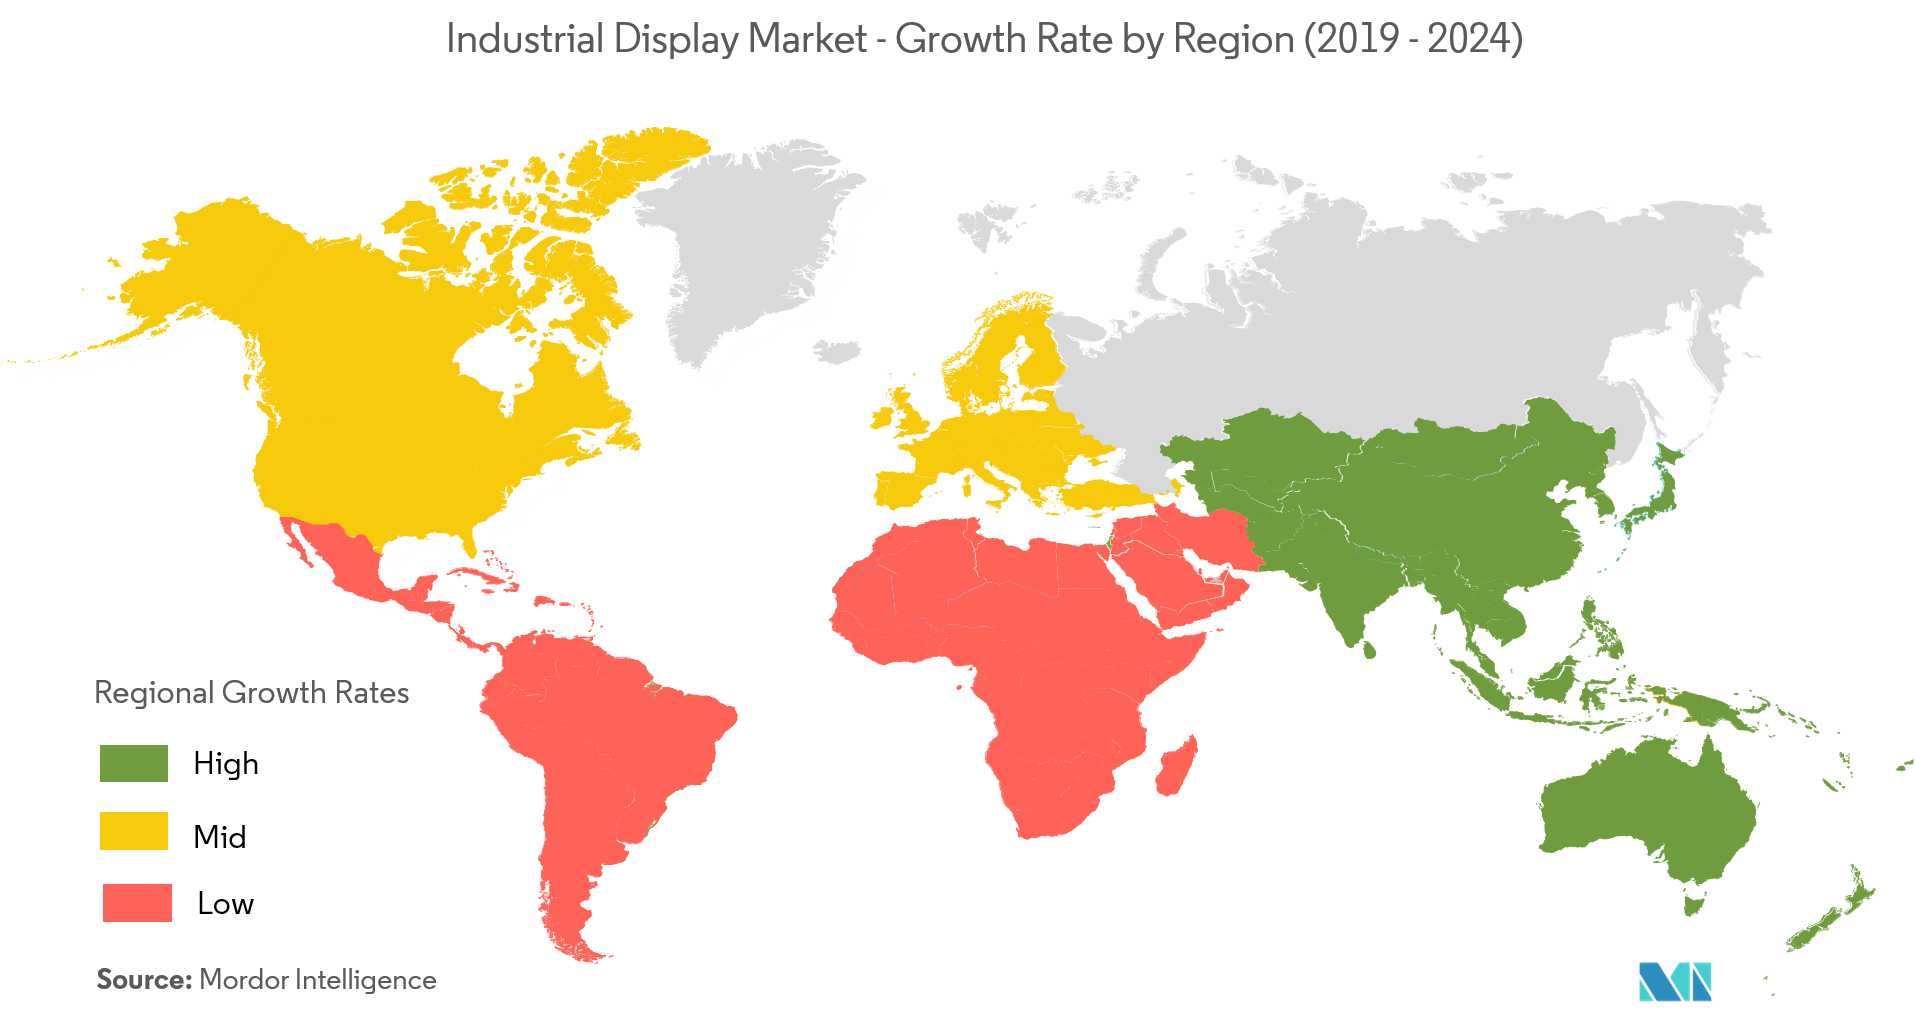 Industrial Display Market - Growth Rate by Region (2019-2024)